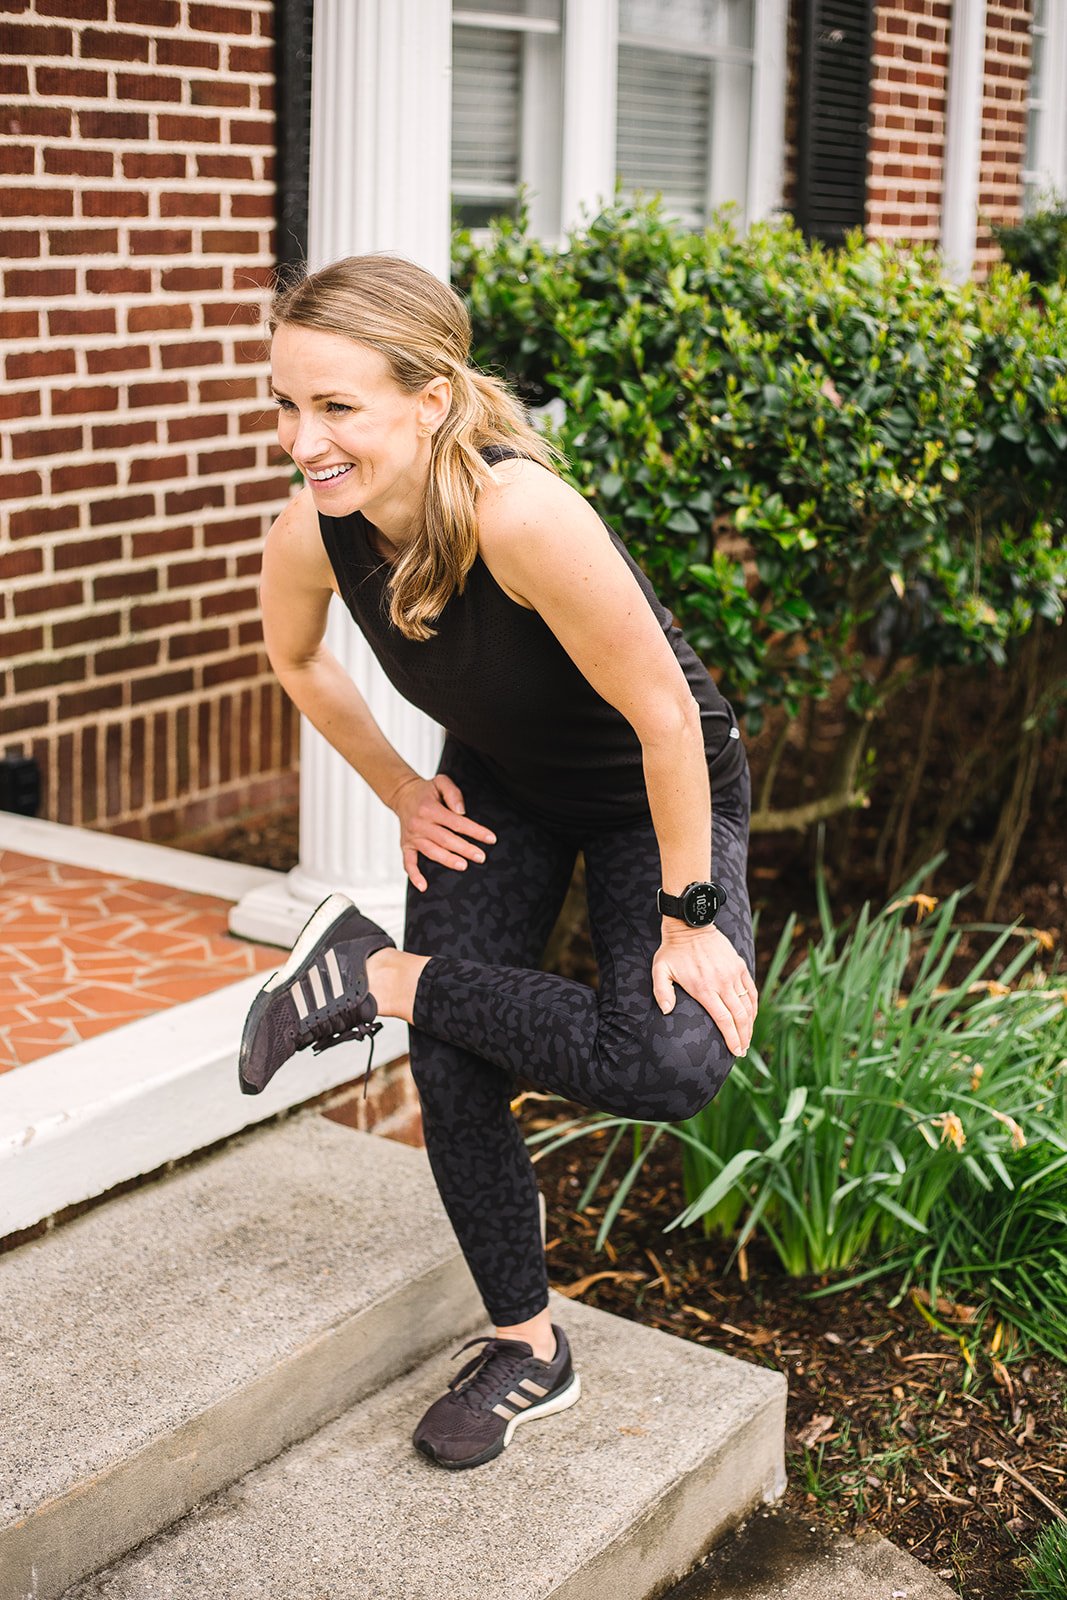 Runner stretching at steps | Dynamic Warm Up Exercises for Running